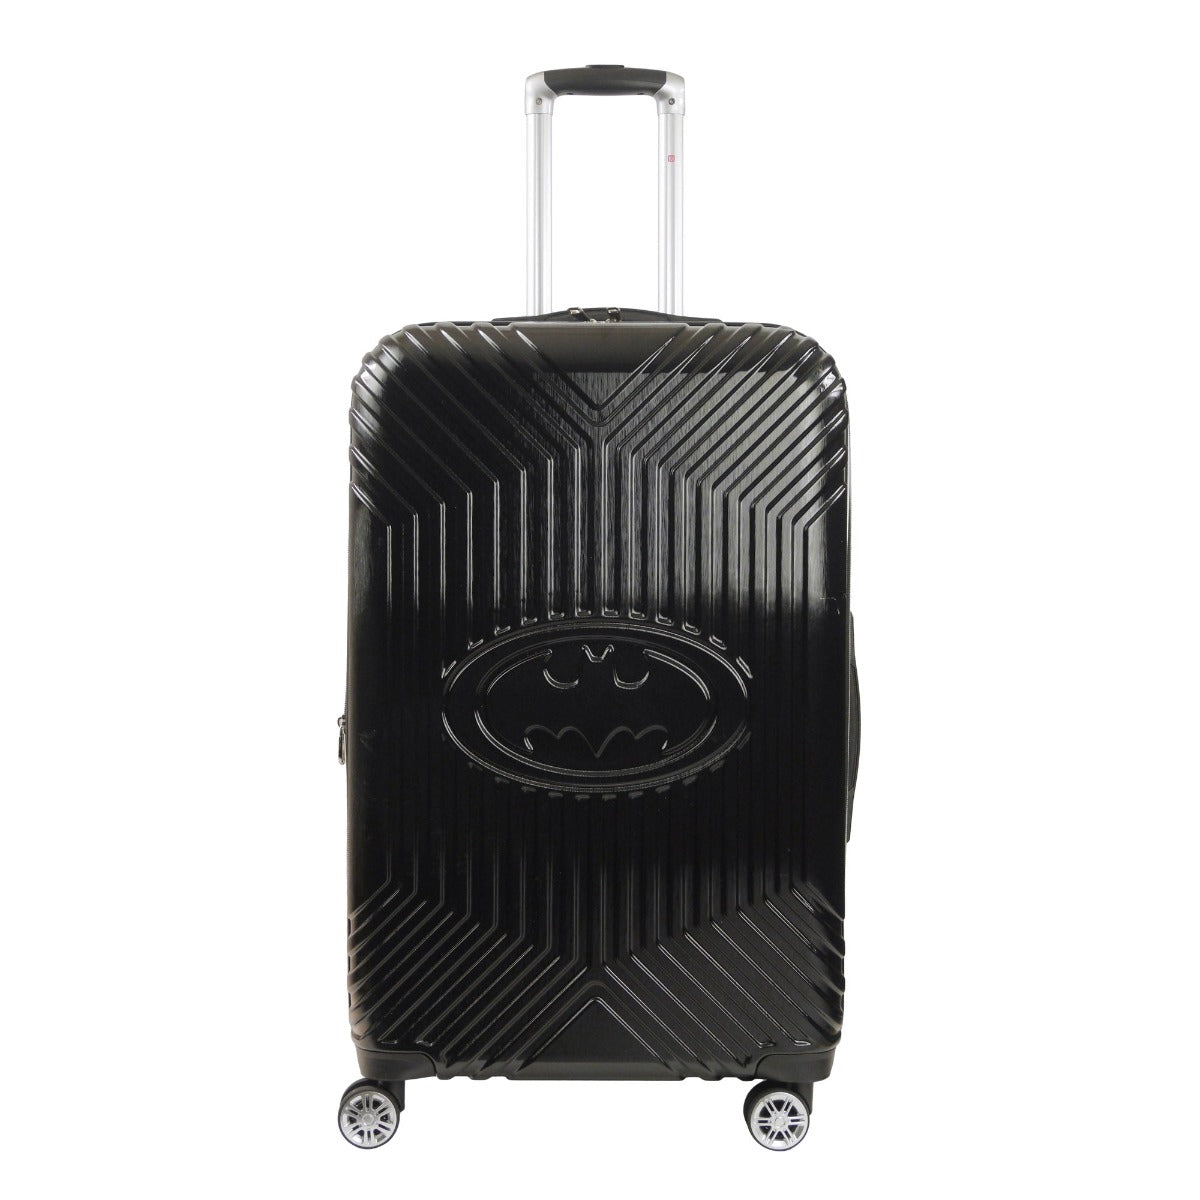 Dc Comics Batman 3D Molded Hard-sided 29" Luggage black spinner suitcase